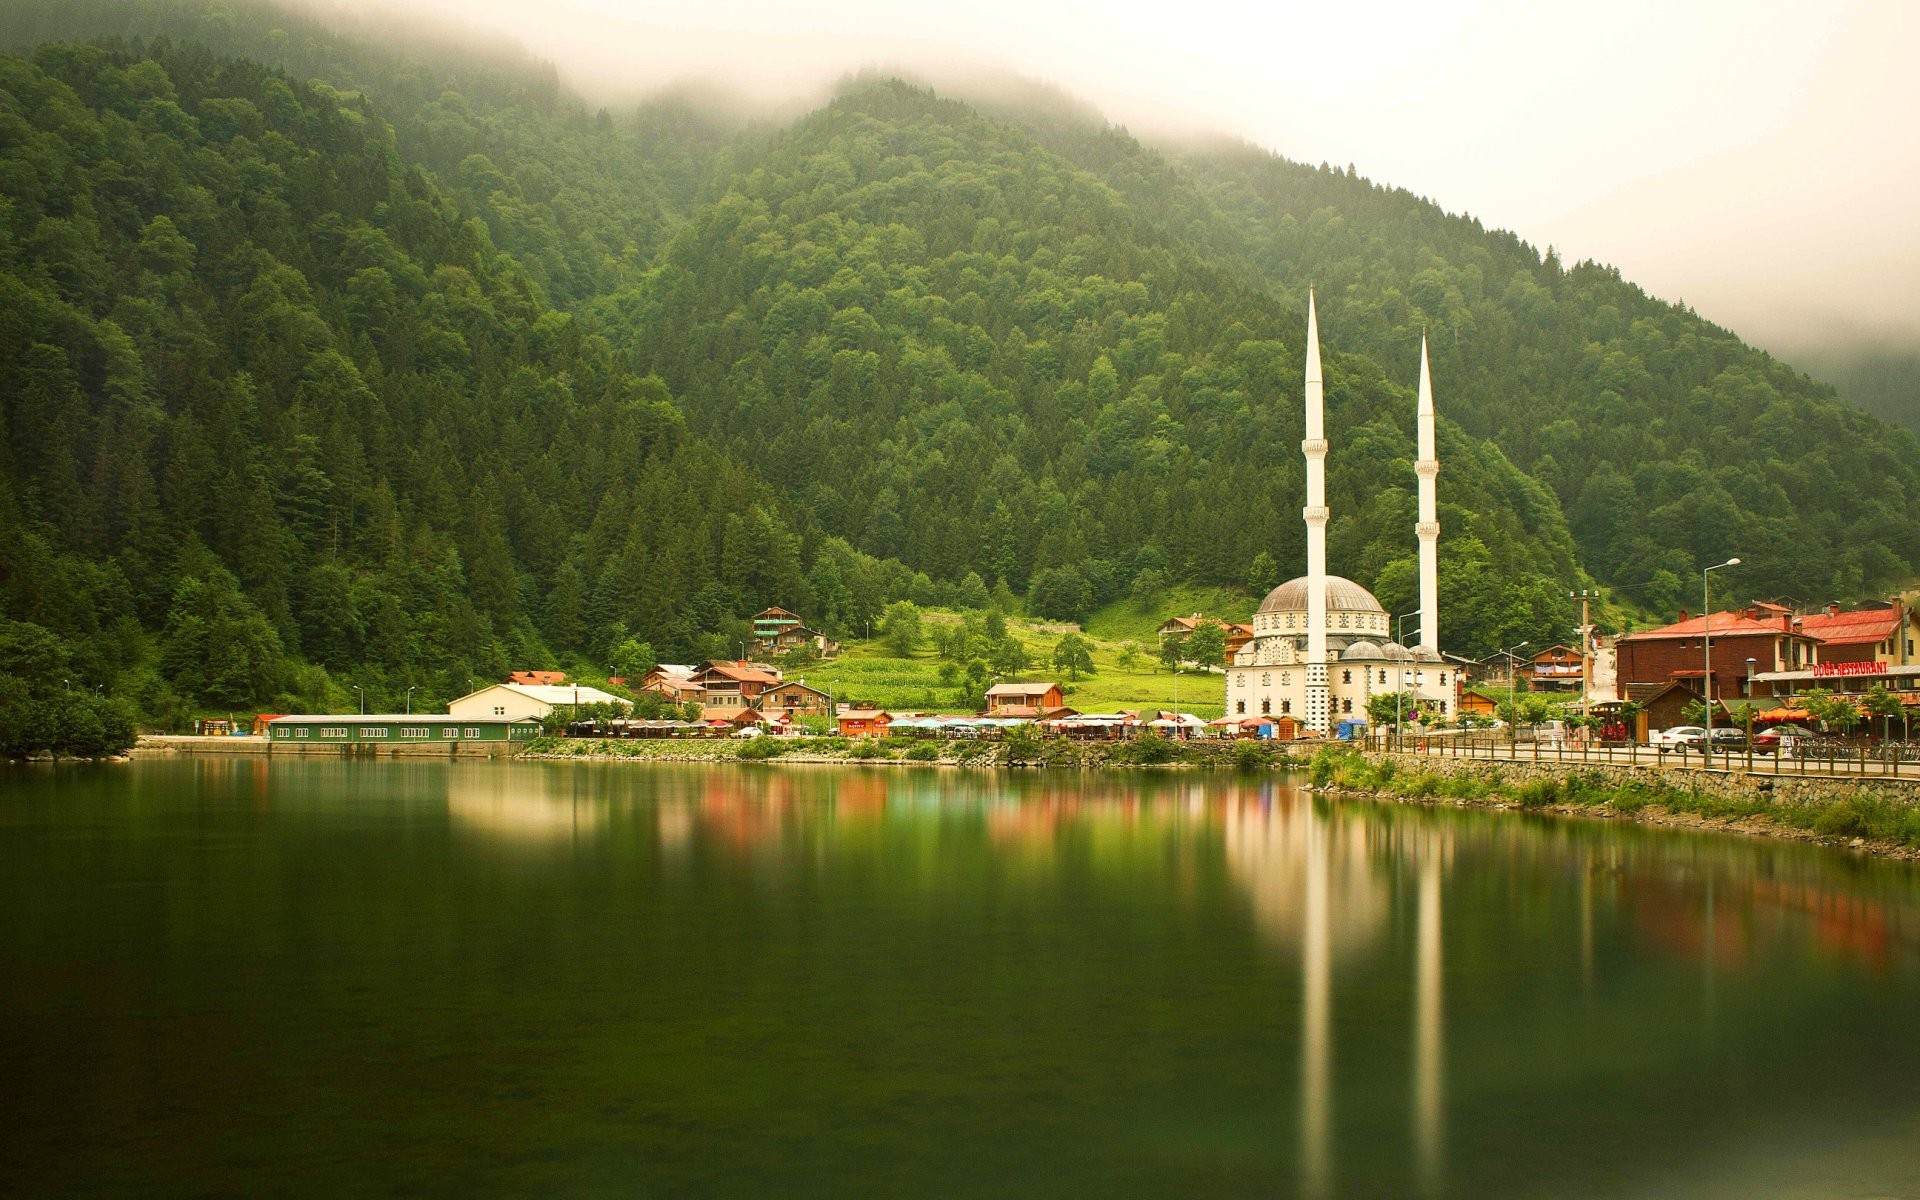 General 1920x1200 nature landscape Turkey Trabzon mosque trees forest lake reflection mist hills